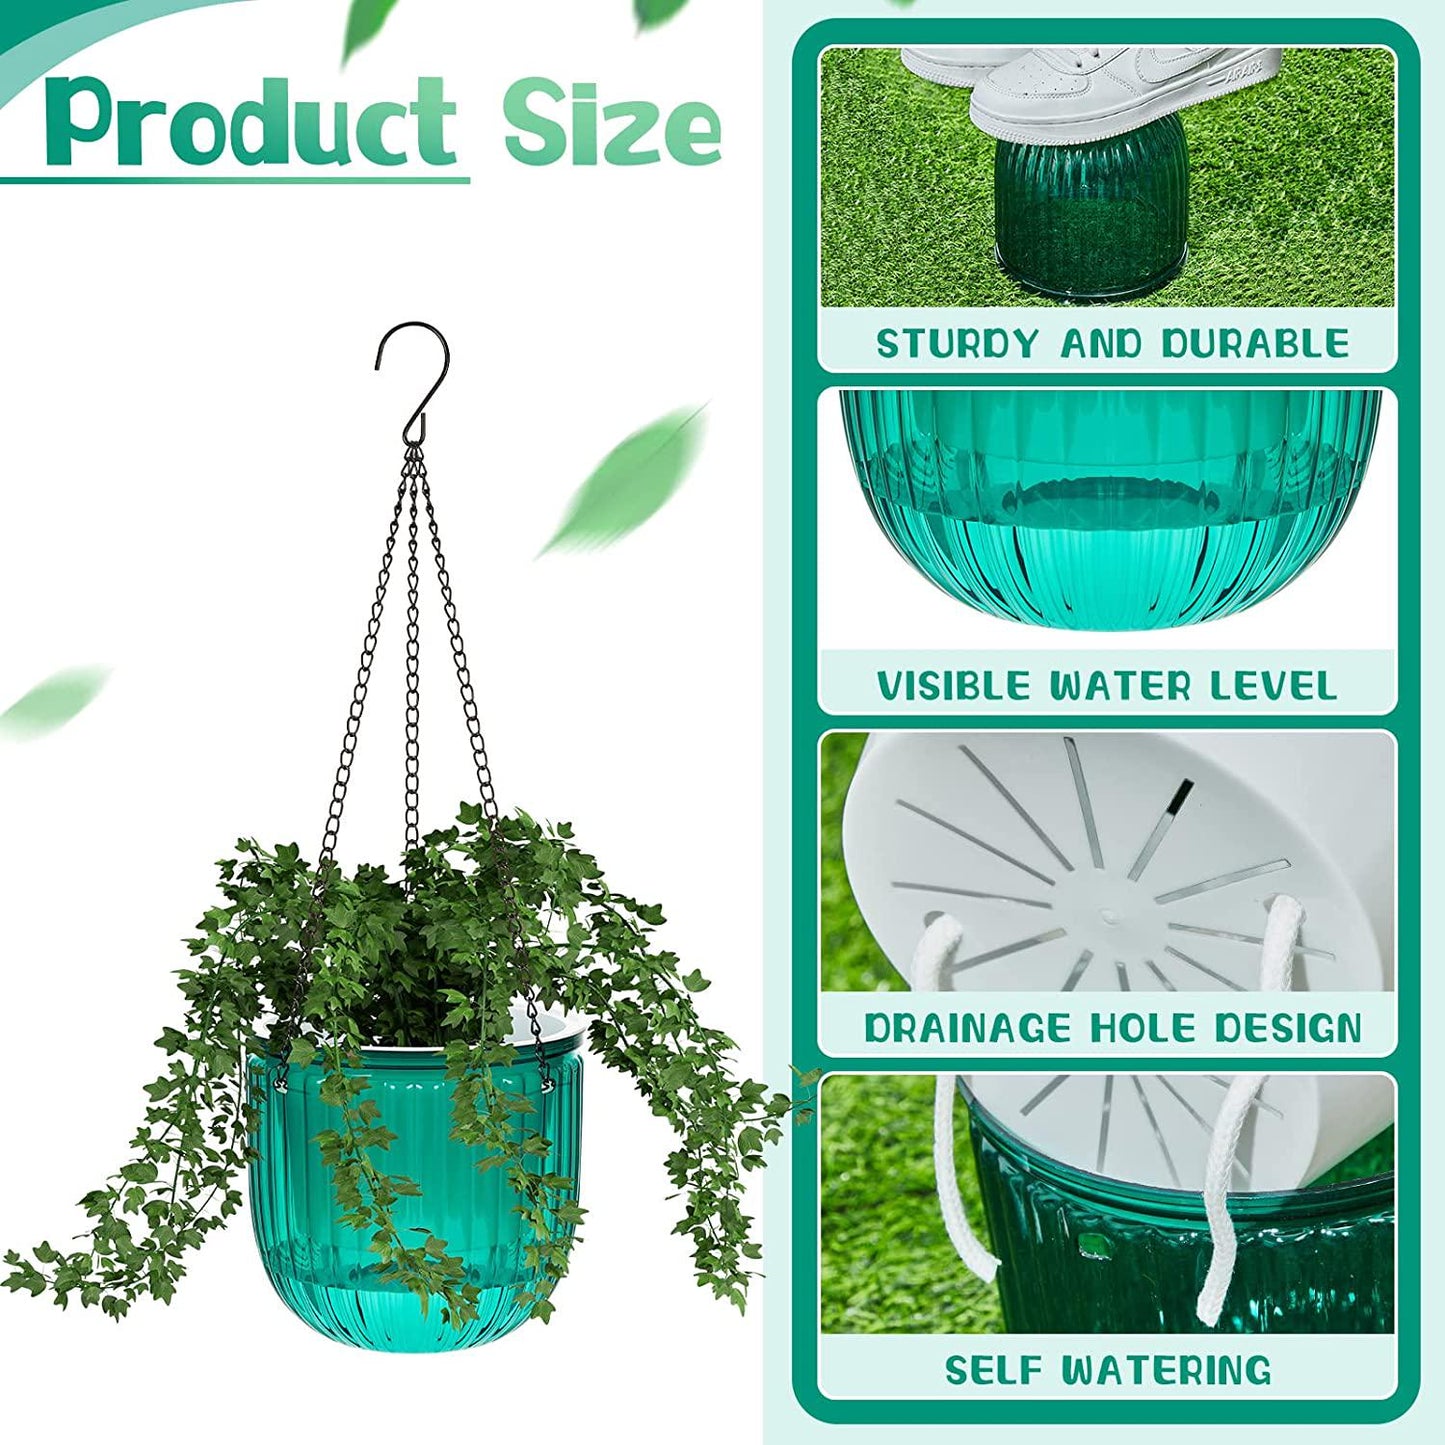 Meanplan 4 Pcs Self Watering Hanging Planter Indoor 6.5 Inch Hanging Baskets for Plants Outdoor Plastic Hanging Flower Pot with 3 Hooks Chains Drainage Holes for Garden Home, Medium Size (Emerald)